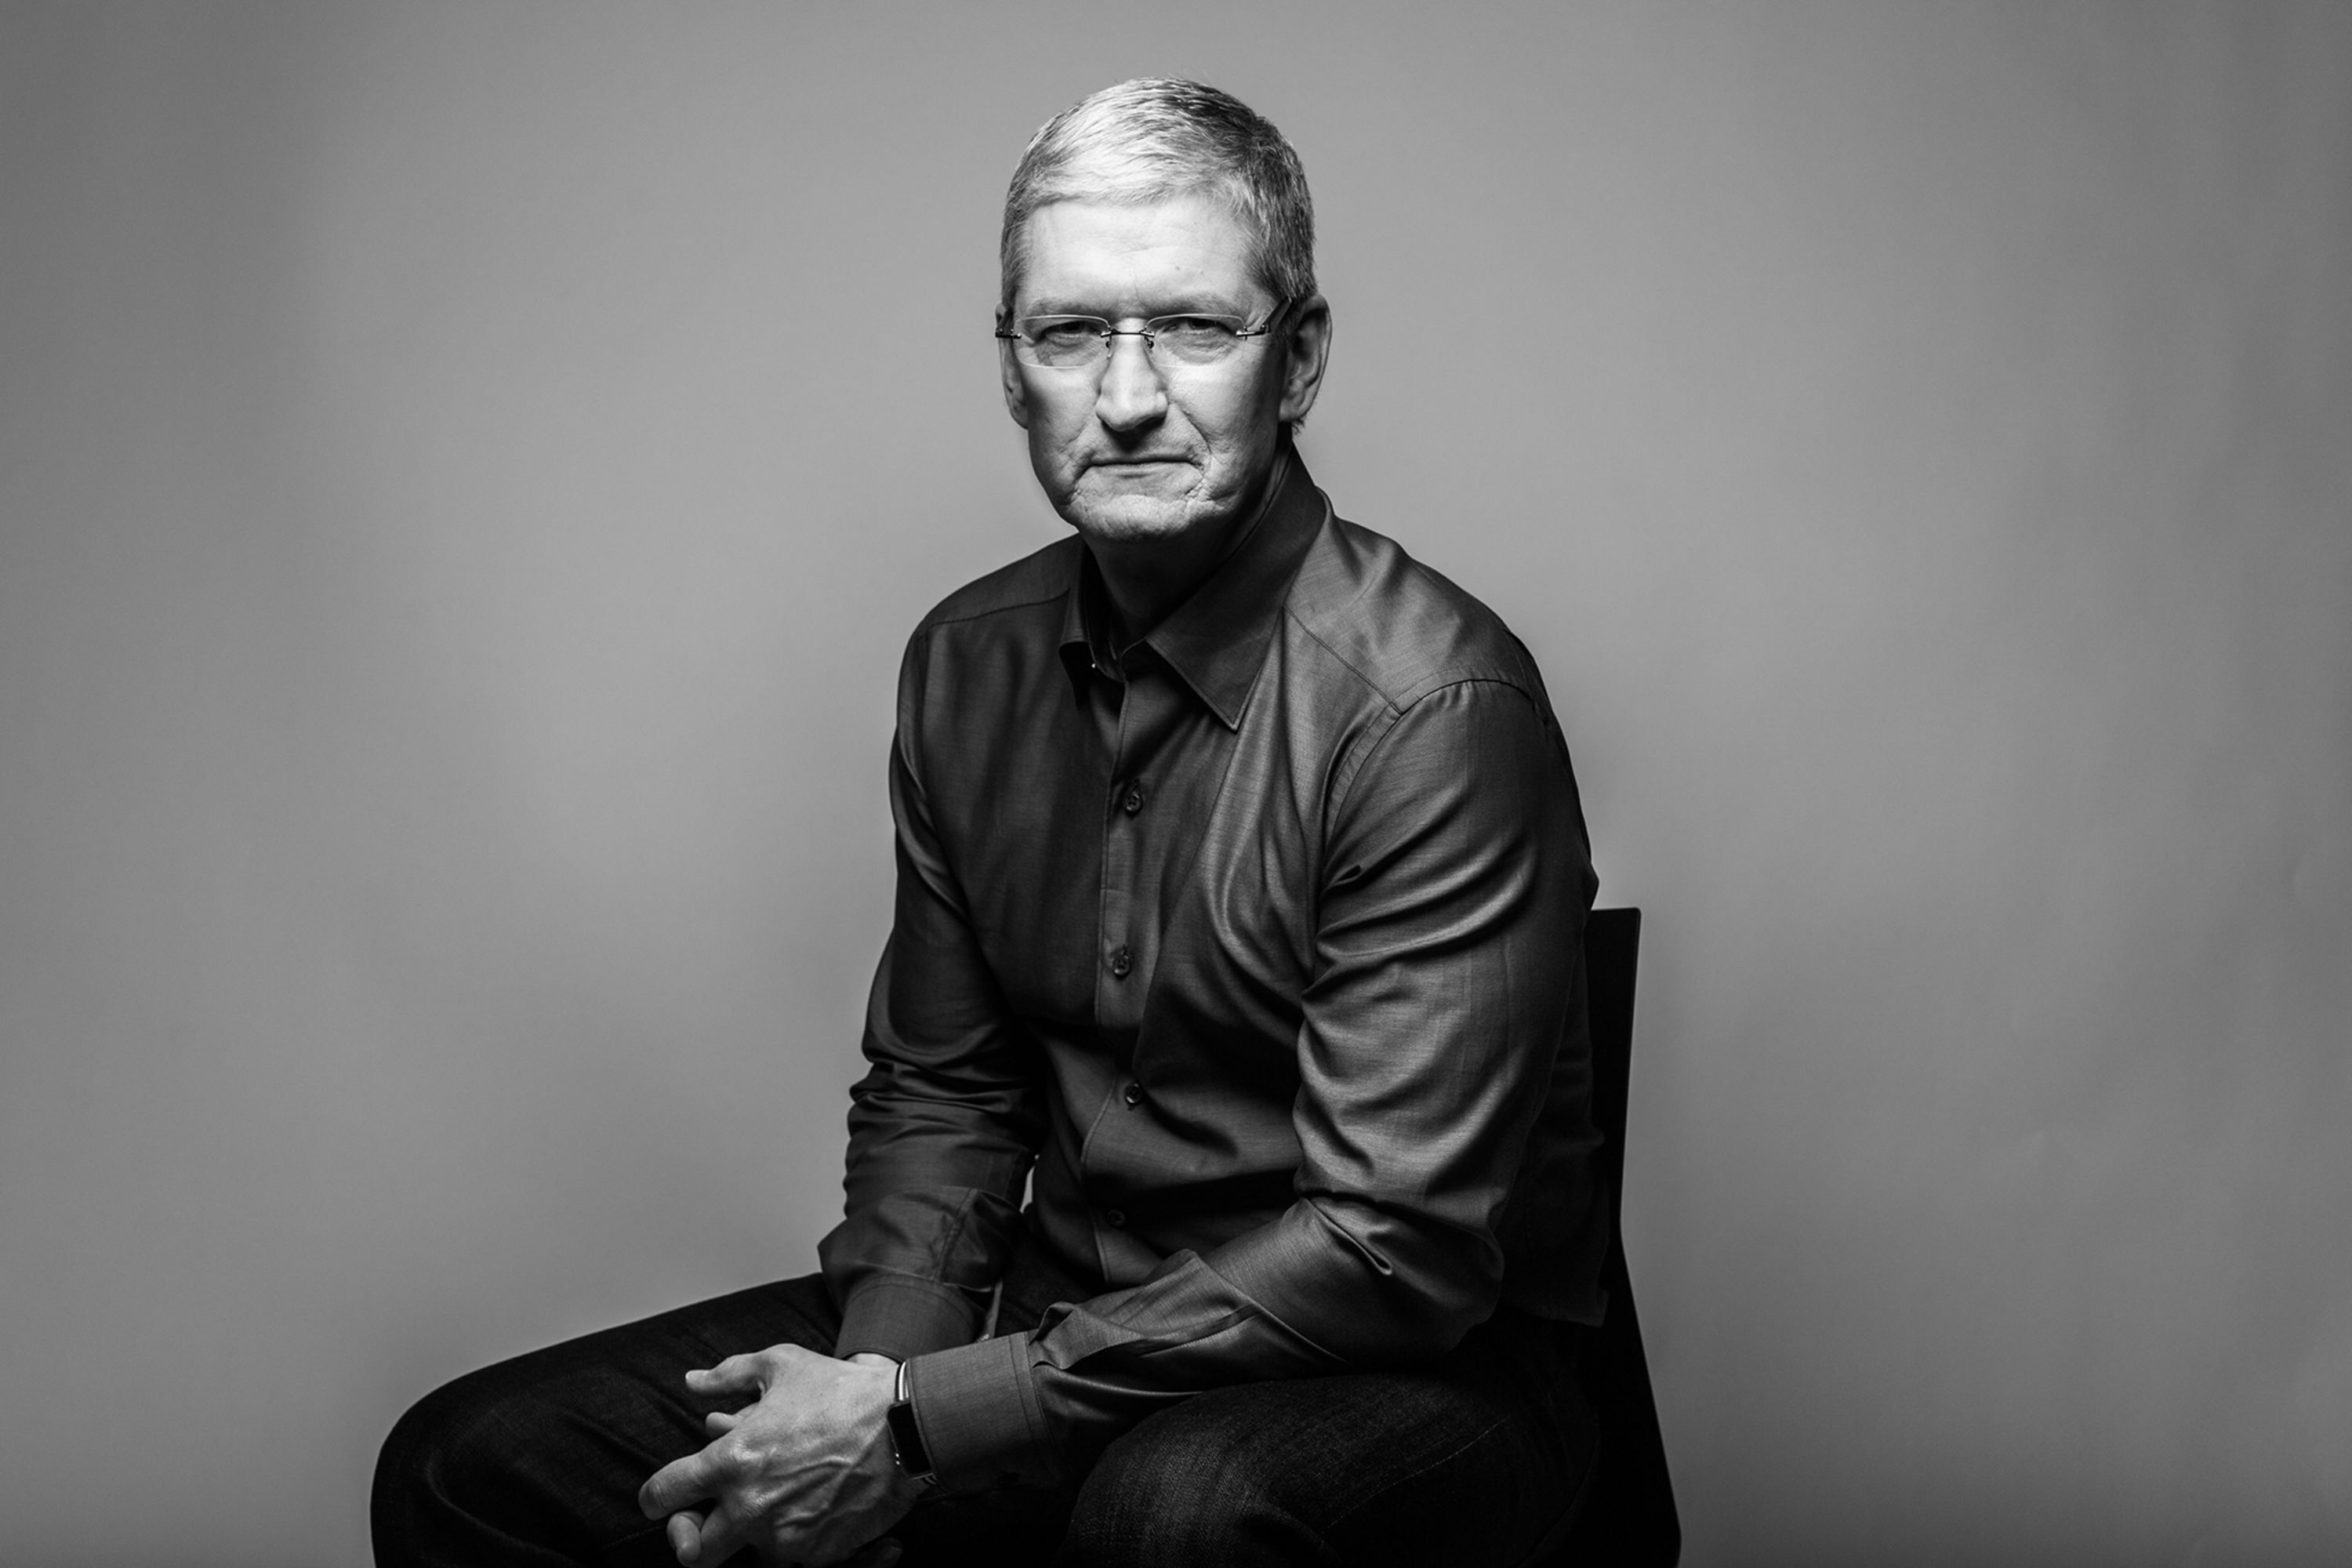 Apple CEO Tim Cook poses for a portrait at Apple's global headquarters in Cupertino, California in 2016.